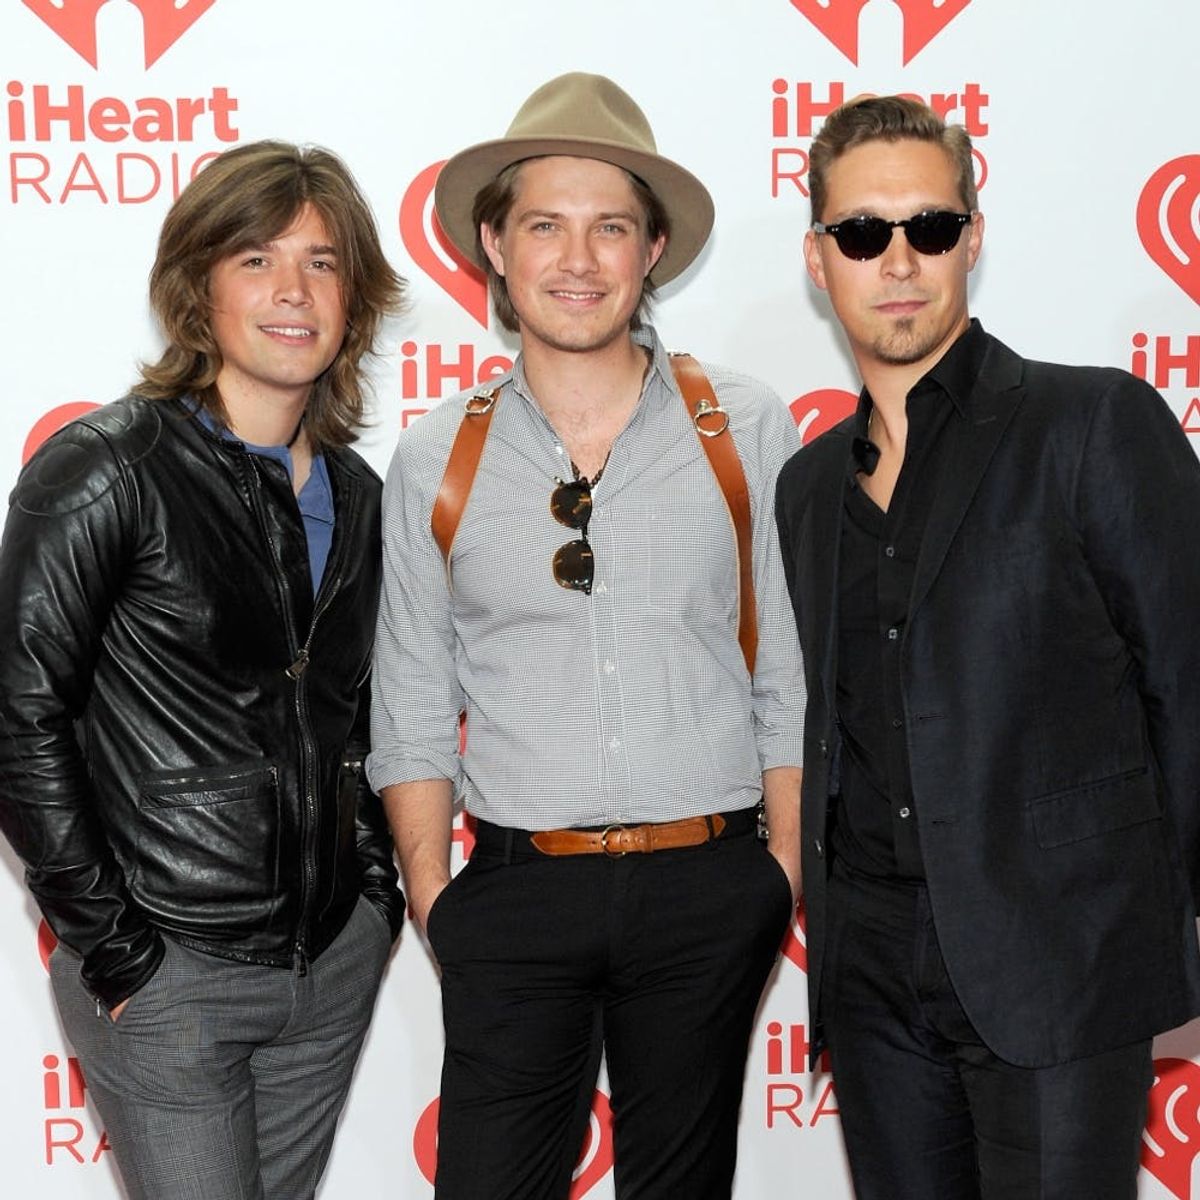 Hanson Says People Have Been Singing “MMMBop” Wrong for Years